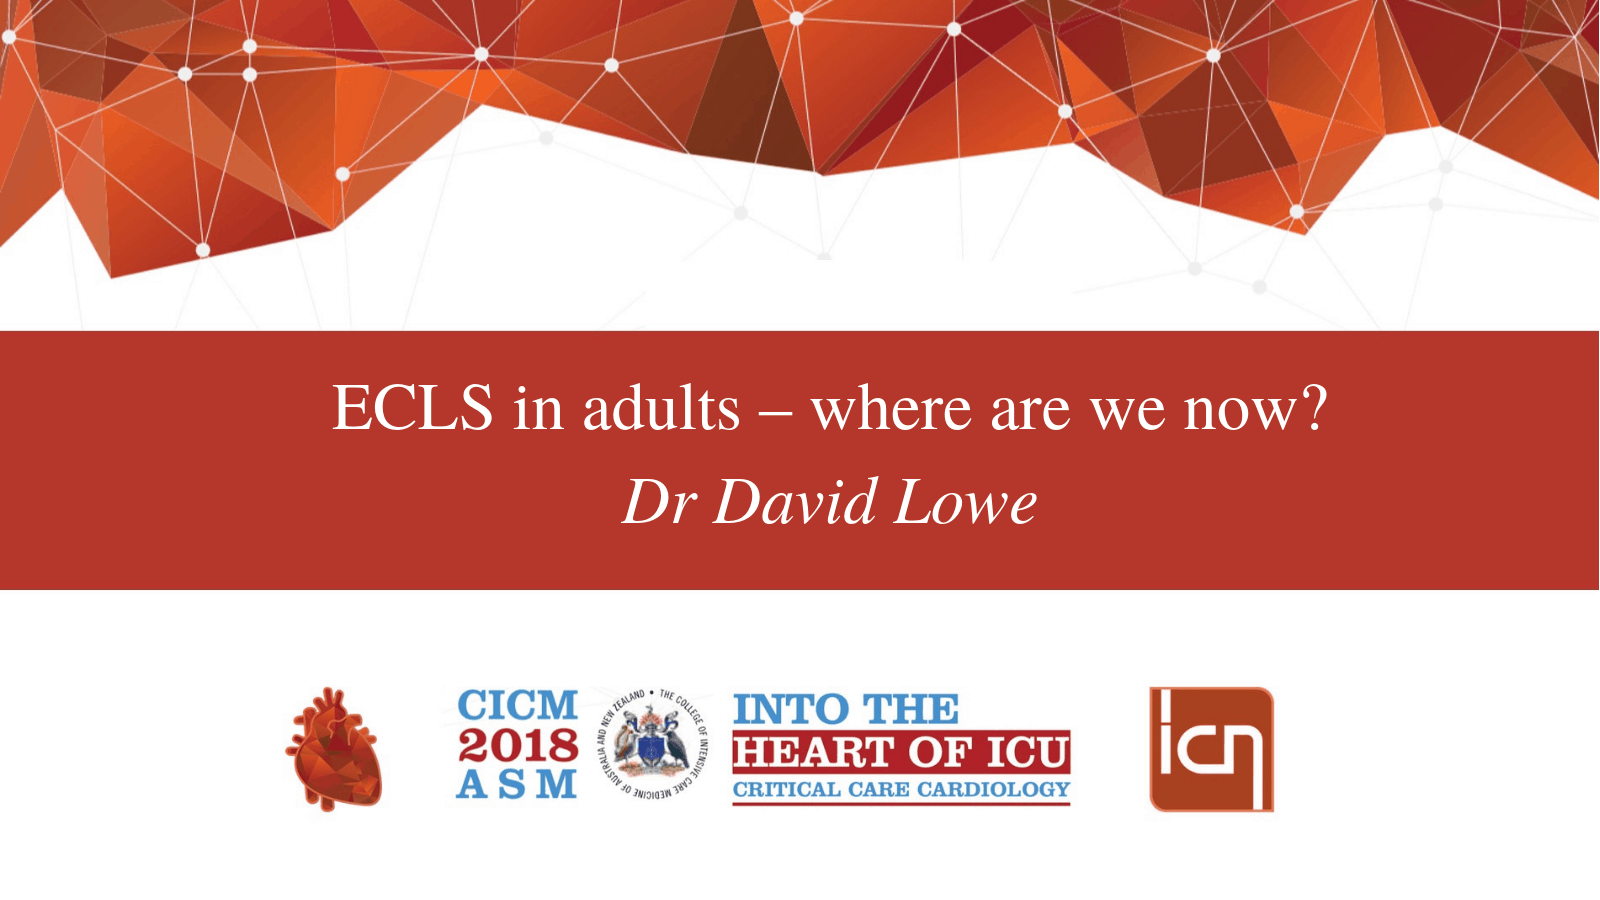 ECLS in adults – where are we now?